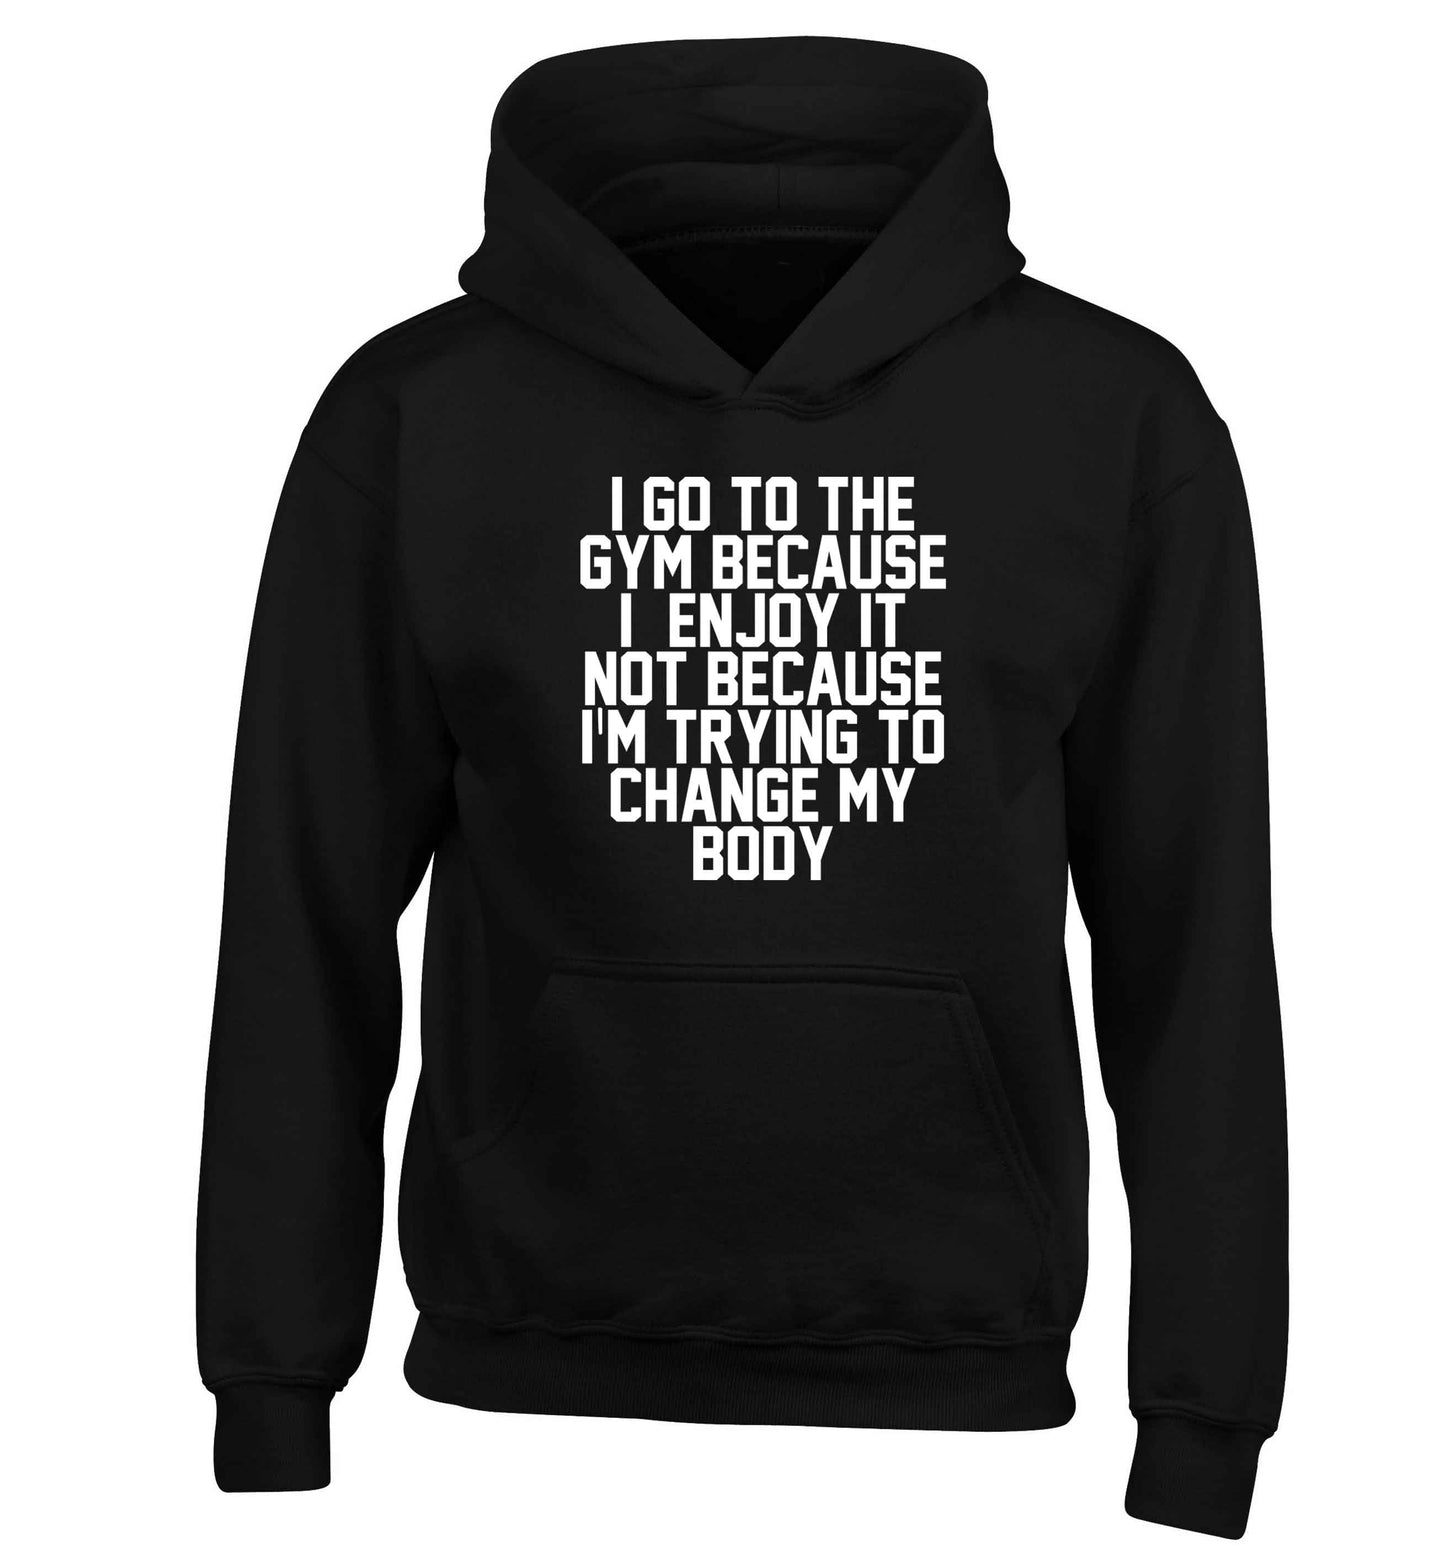 I go to the gym because I enjoy it not because I'm trying to change my body children's black hoodie 12-13 Years